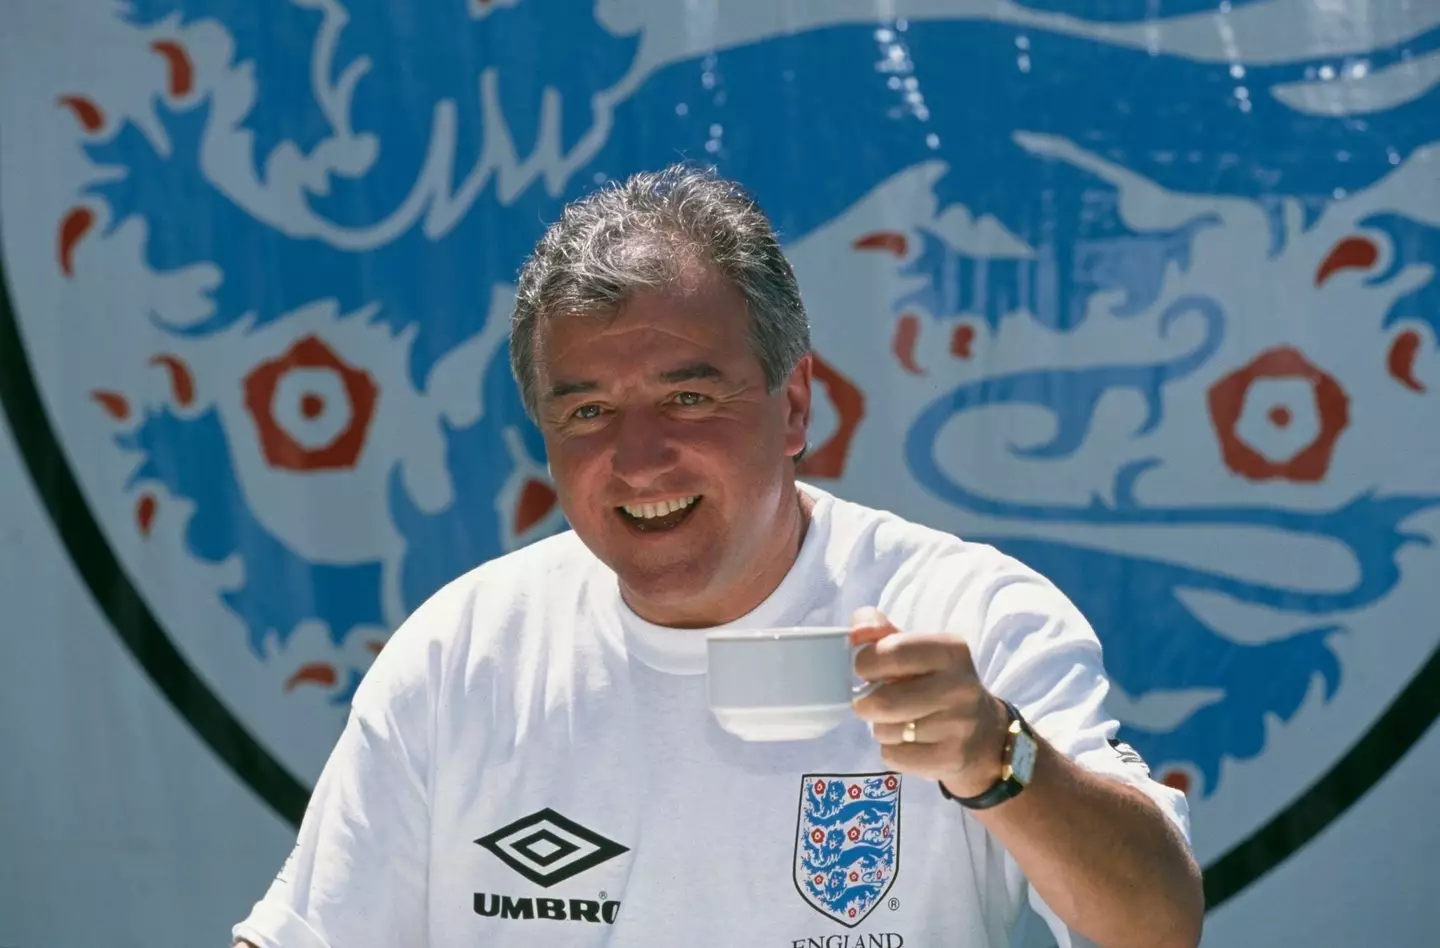 Former England manager Terry Venables has died at the age of 80.